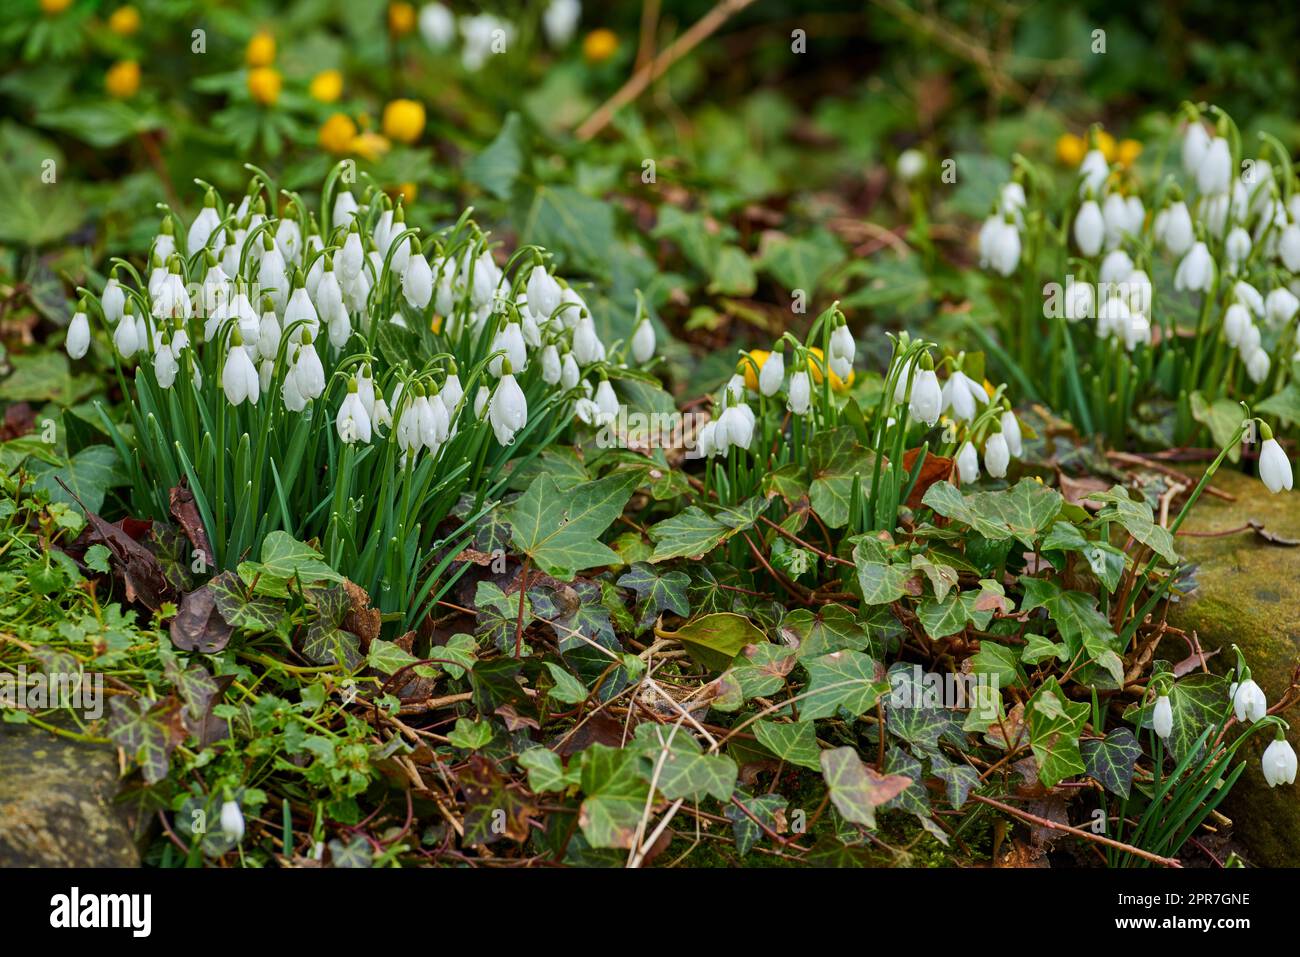 Galanthus woronowii growing in their natural habitat in a dense forest. Green snowdrop in the woods. Woronows snowdrop. Plant species thriving in their natural habitat and environment Stock Photo